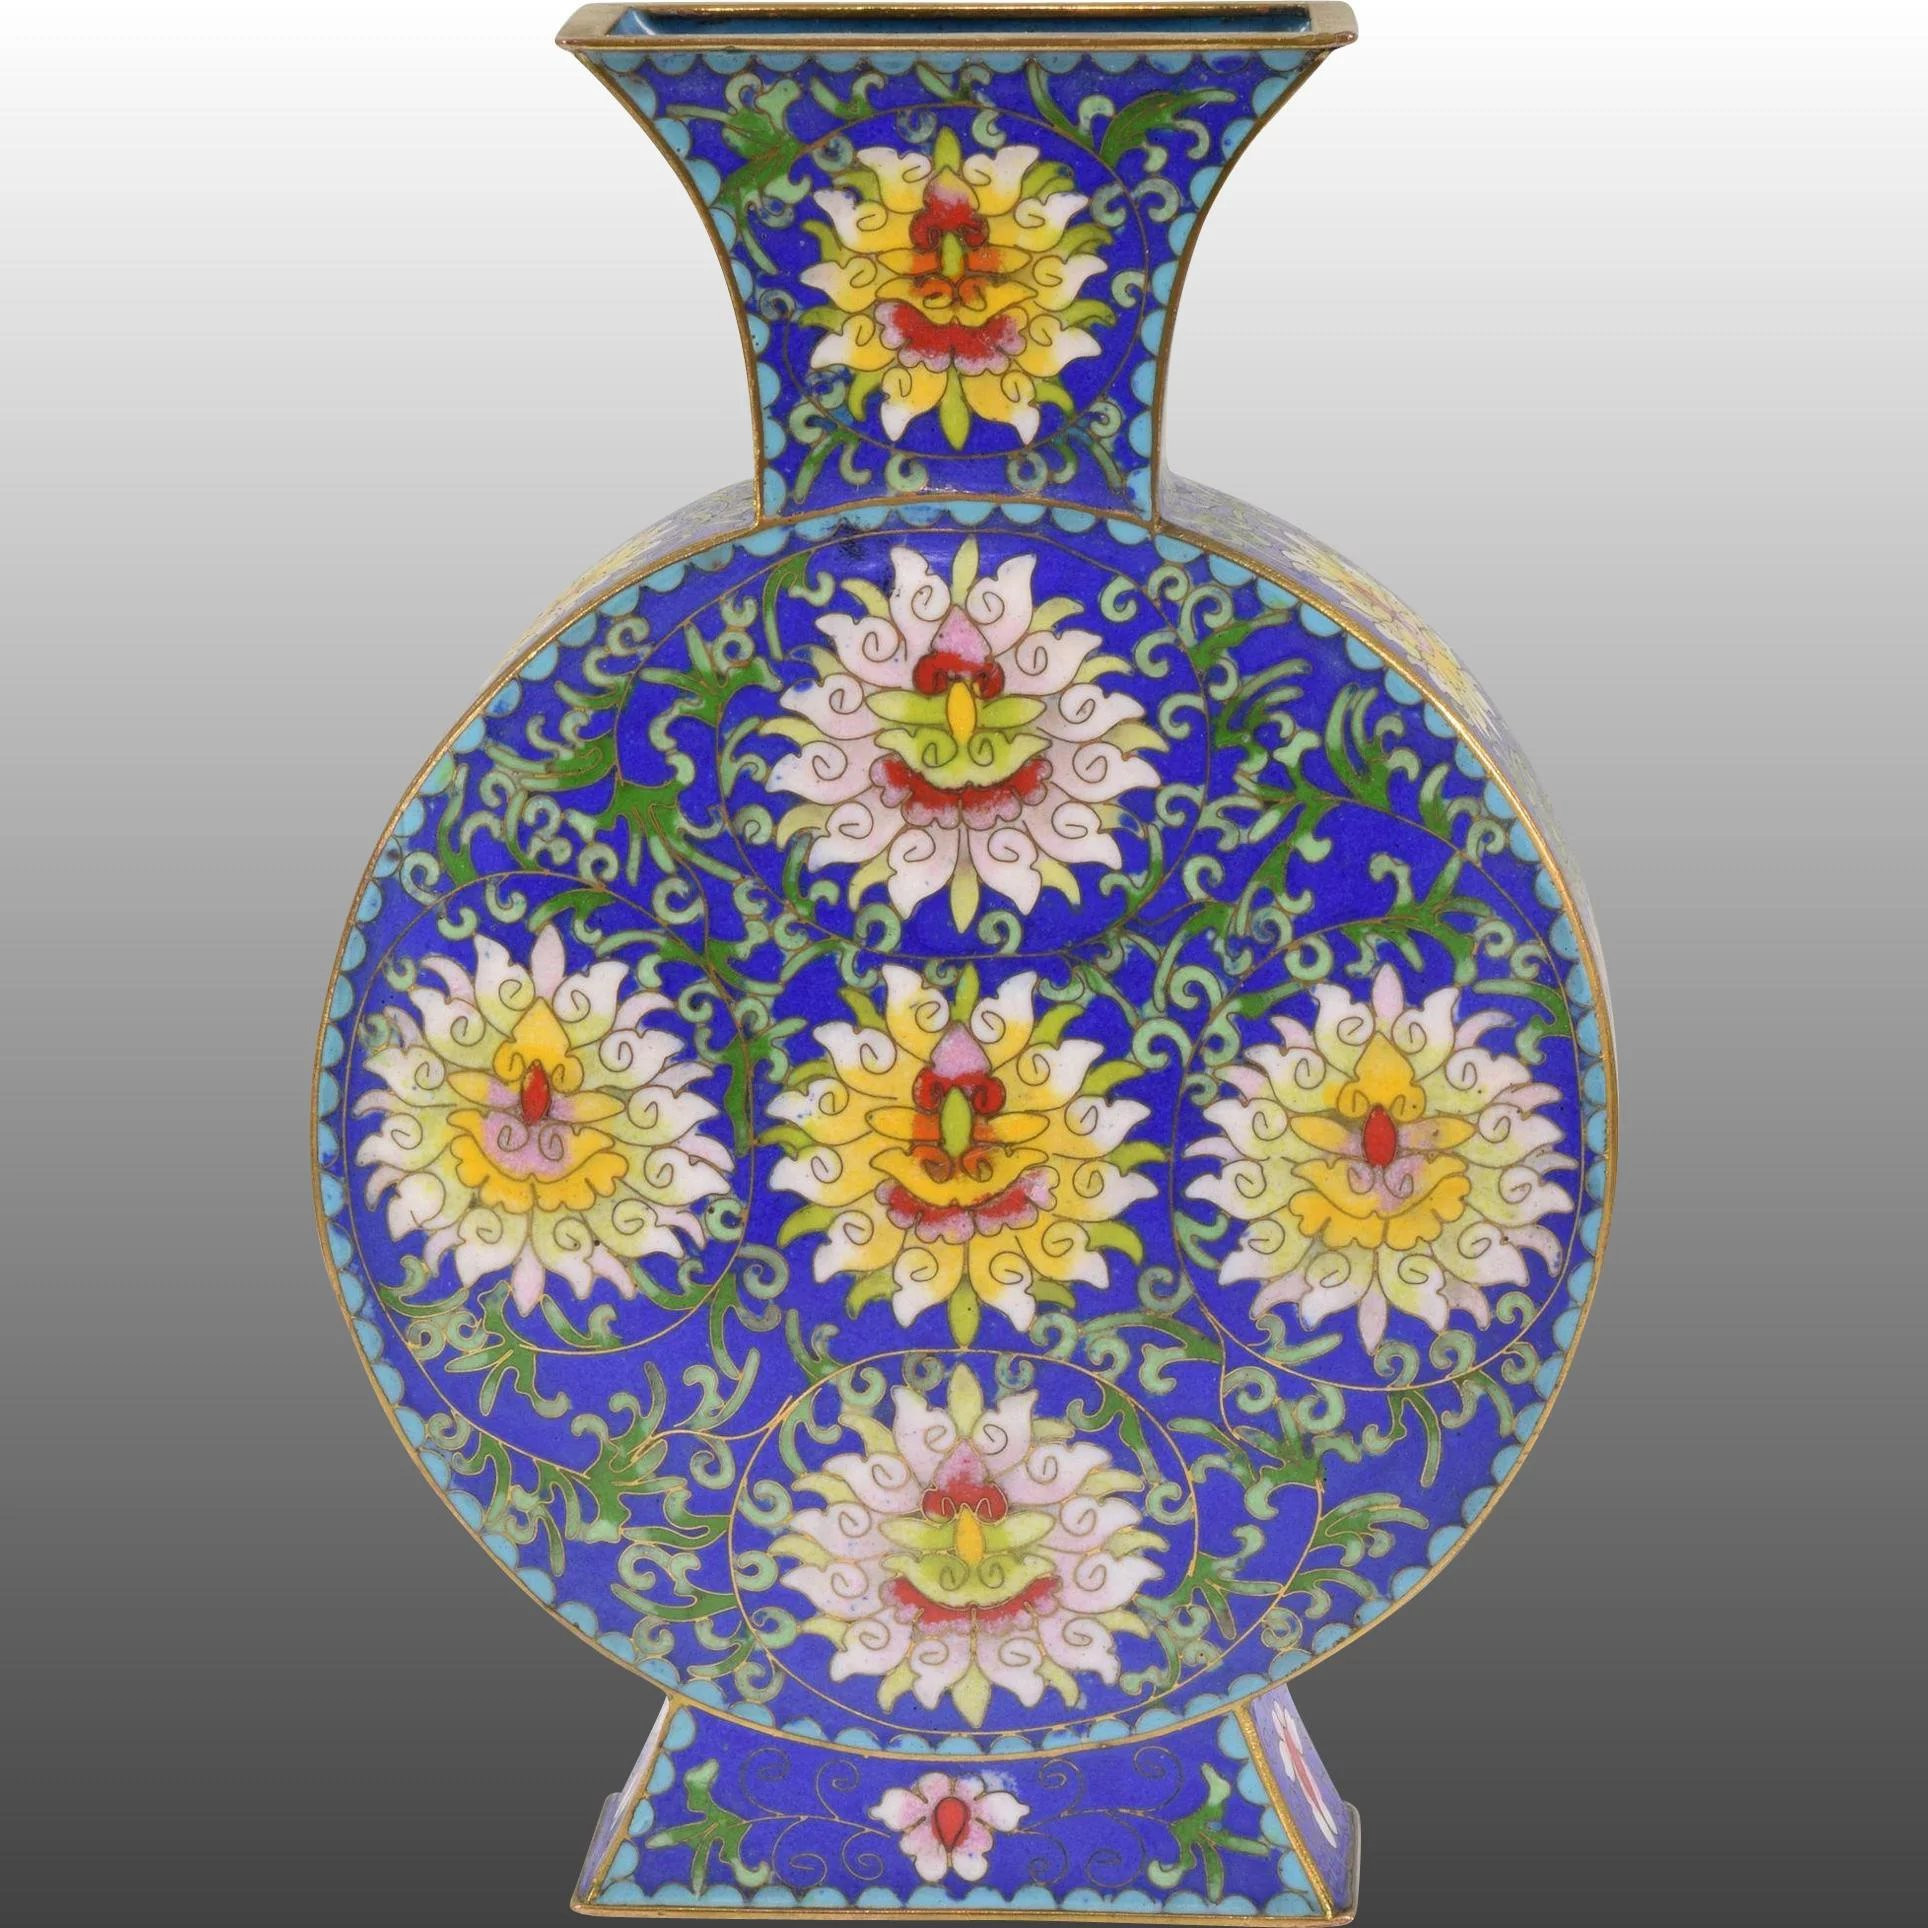 10 Wonderful Vintage Japanese Cloisonne Vase 2024 free download vintage japanese cloisonne vase of pair vintage petite blue cloisonne pillow type vases with yellow for click to expand